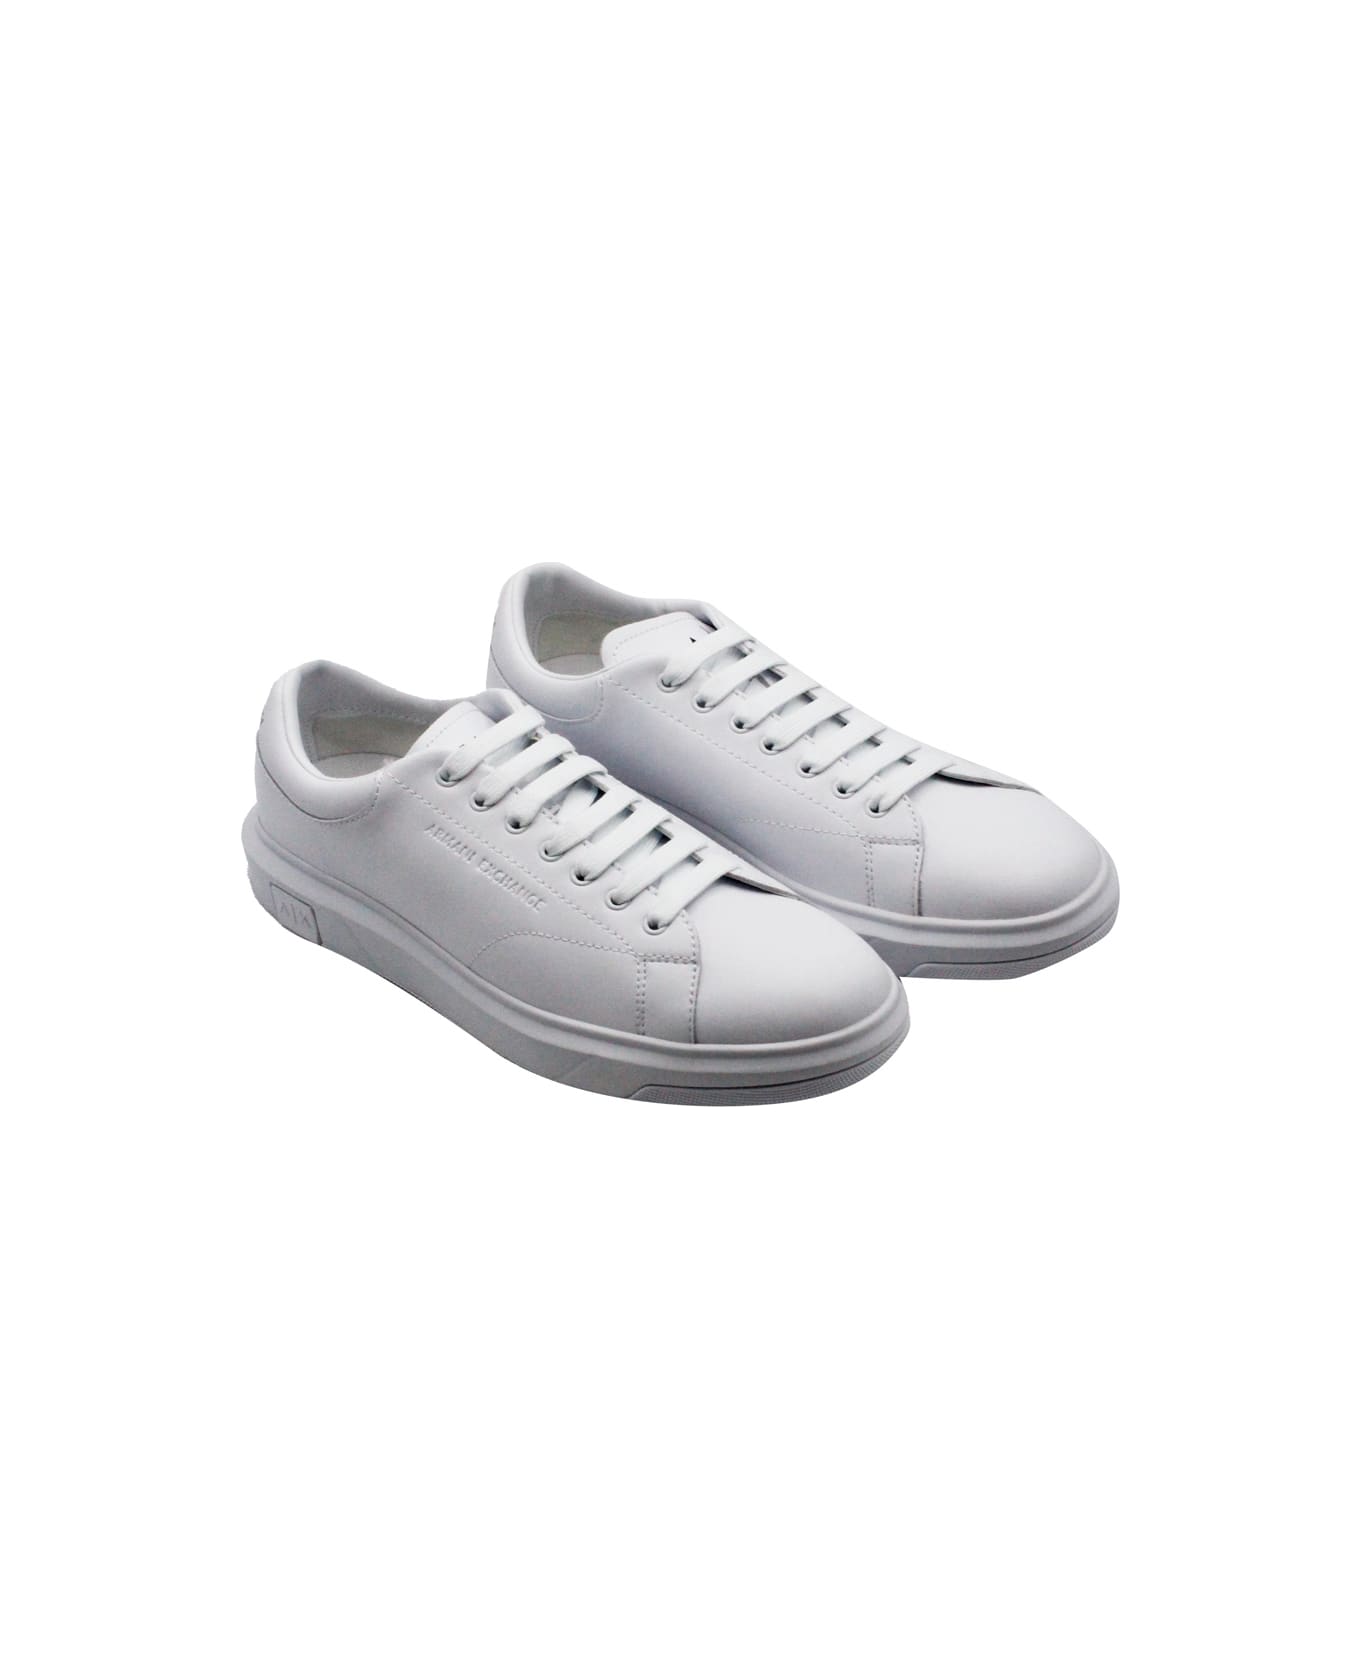 Armani Collezioni Leather Sneakers With Matching Box Sole And Lace Closure. Small Logo On The Tongue And Back - White スニーカー